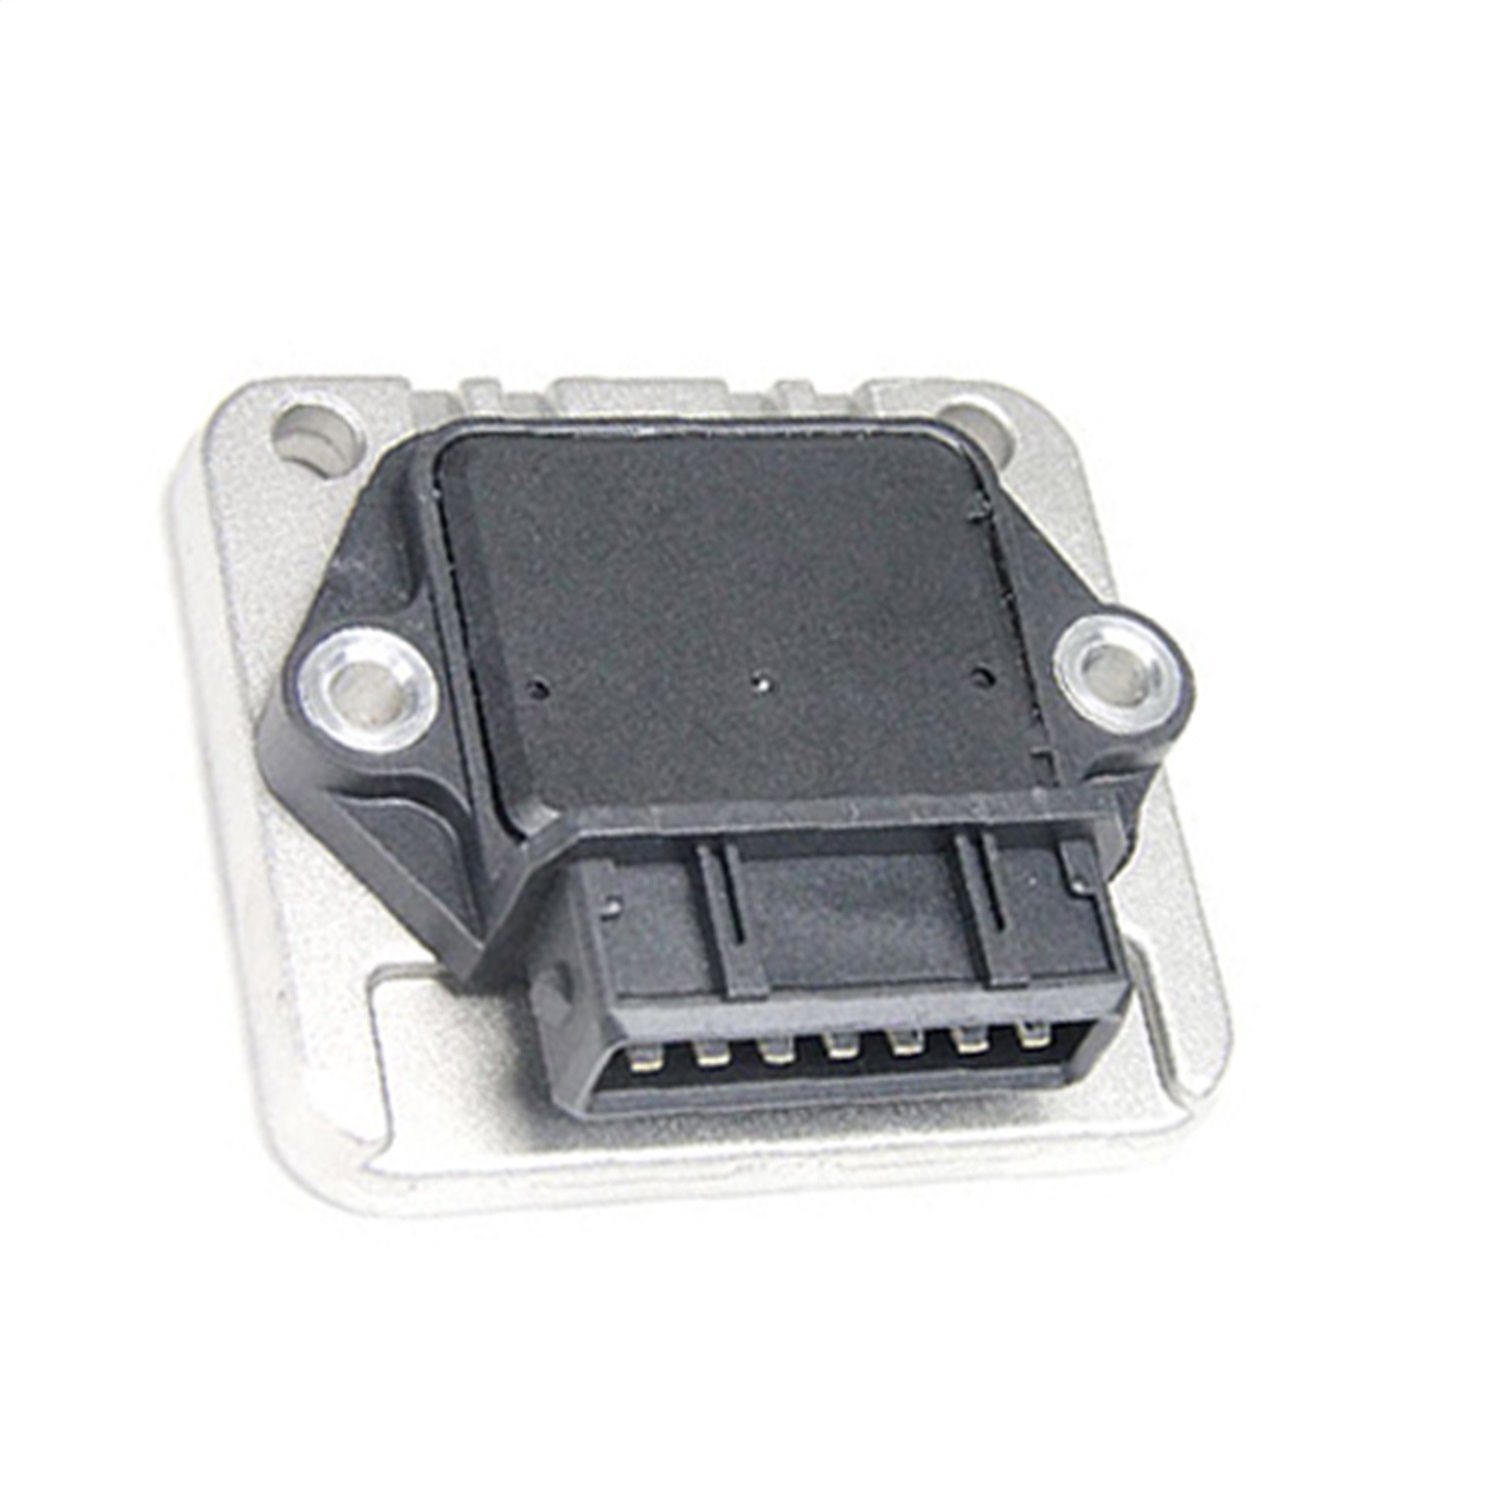 OE Replacement Ignition Control Module for Audi, Volkswagen, Peugeot